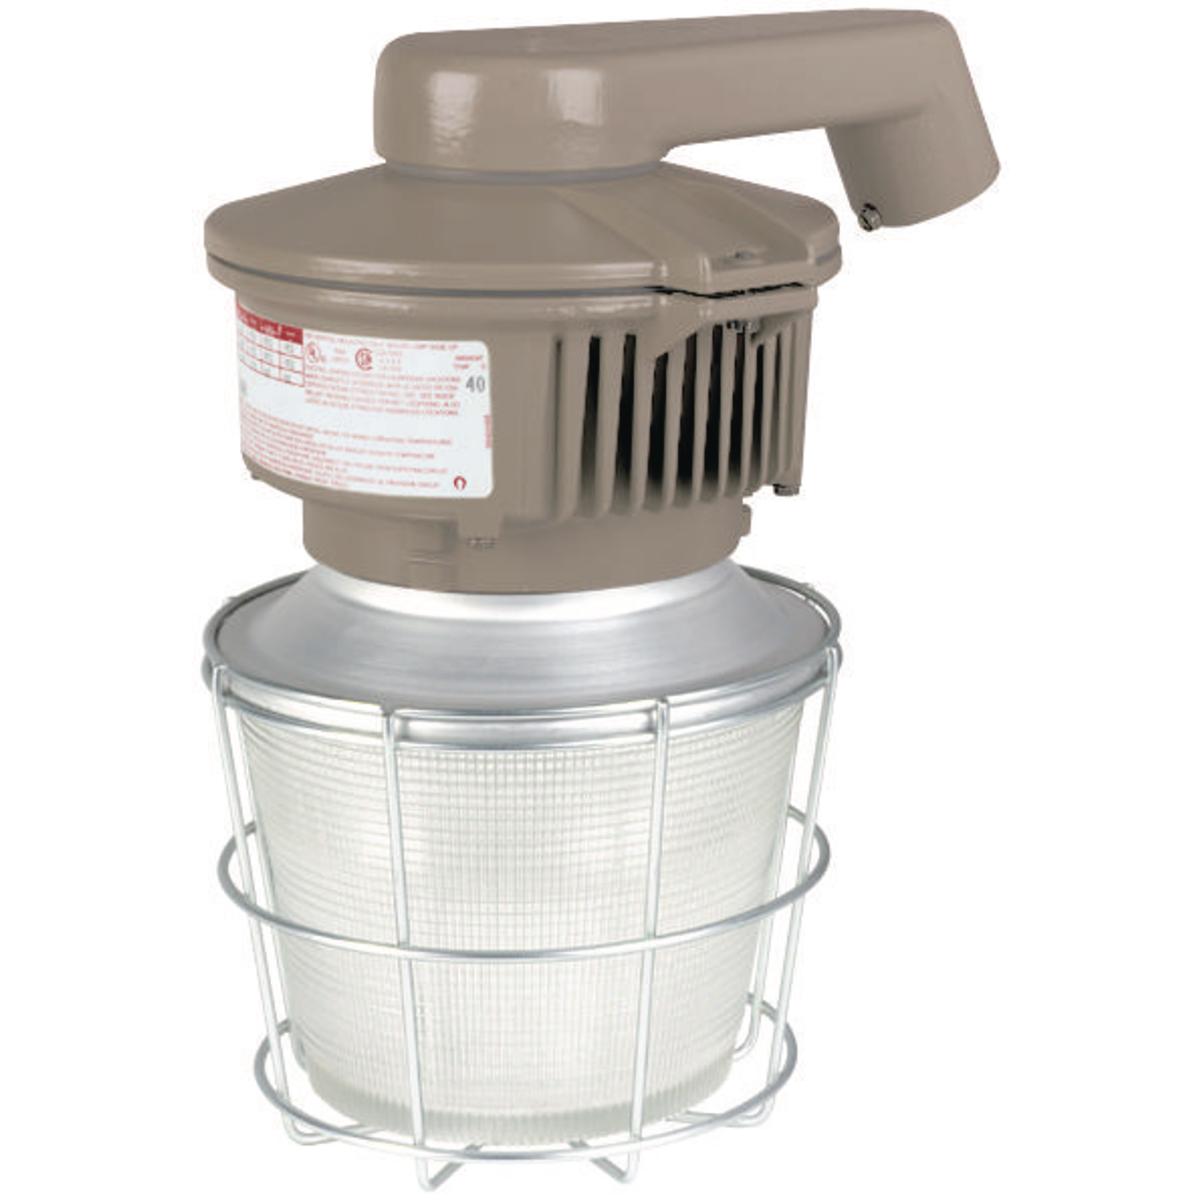 Hubbell MBL4530D4S8G The MBL Series is a compact low bay energy efficient LED. The design of the MBL makes it suitable for harsh and hazardous environments using a cast copper-free aluminum. Its low profile and compact design allow the MBL to fit in areas where larger fixture